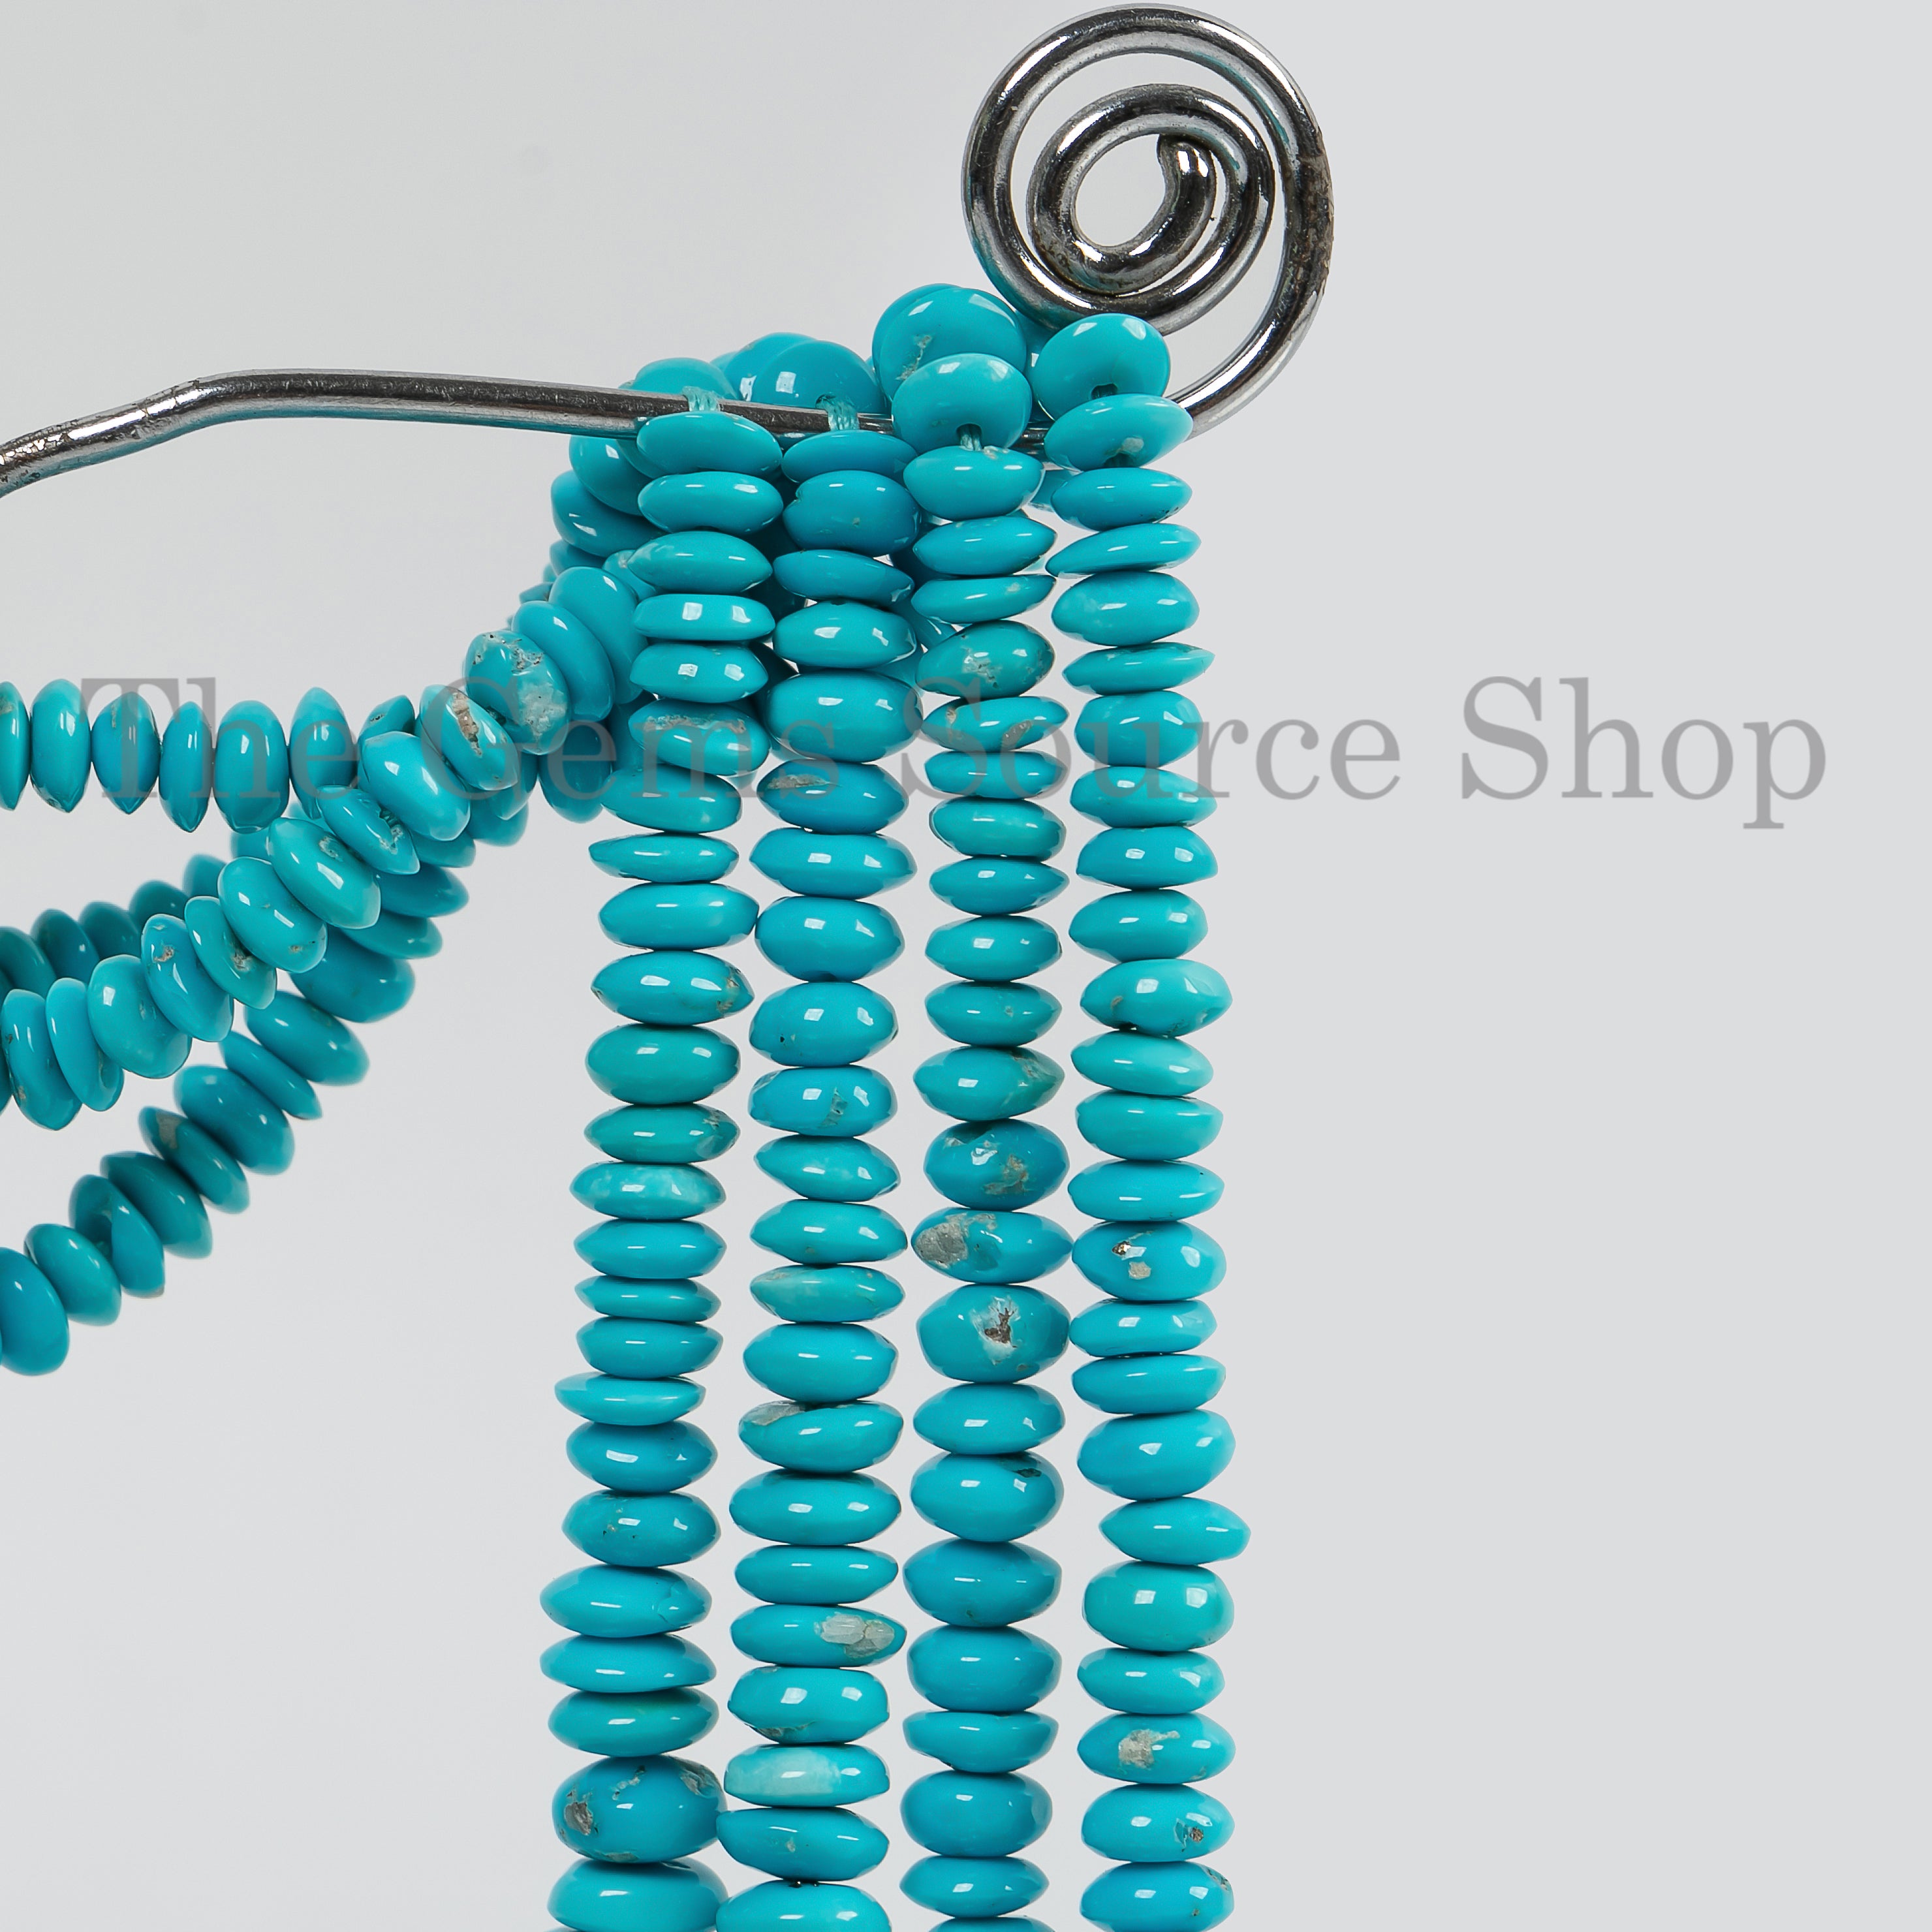 Natural Sleeping Beauty Turquoise Beads, Turquoise Smooth Button Shape Beads, Turquoise Gemstone Beads